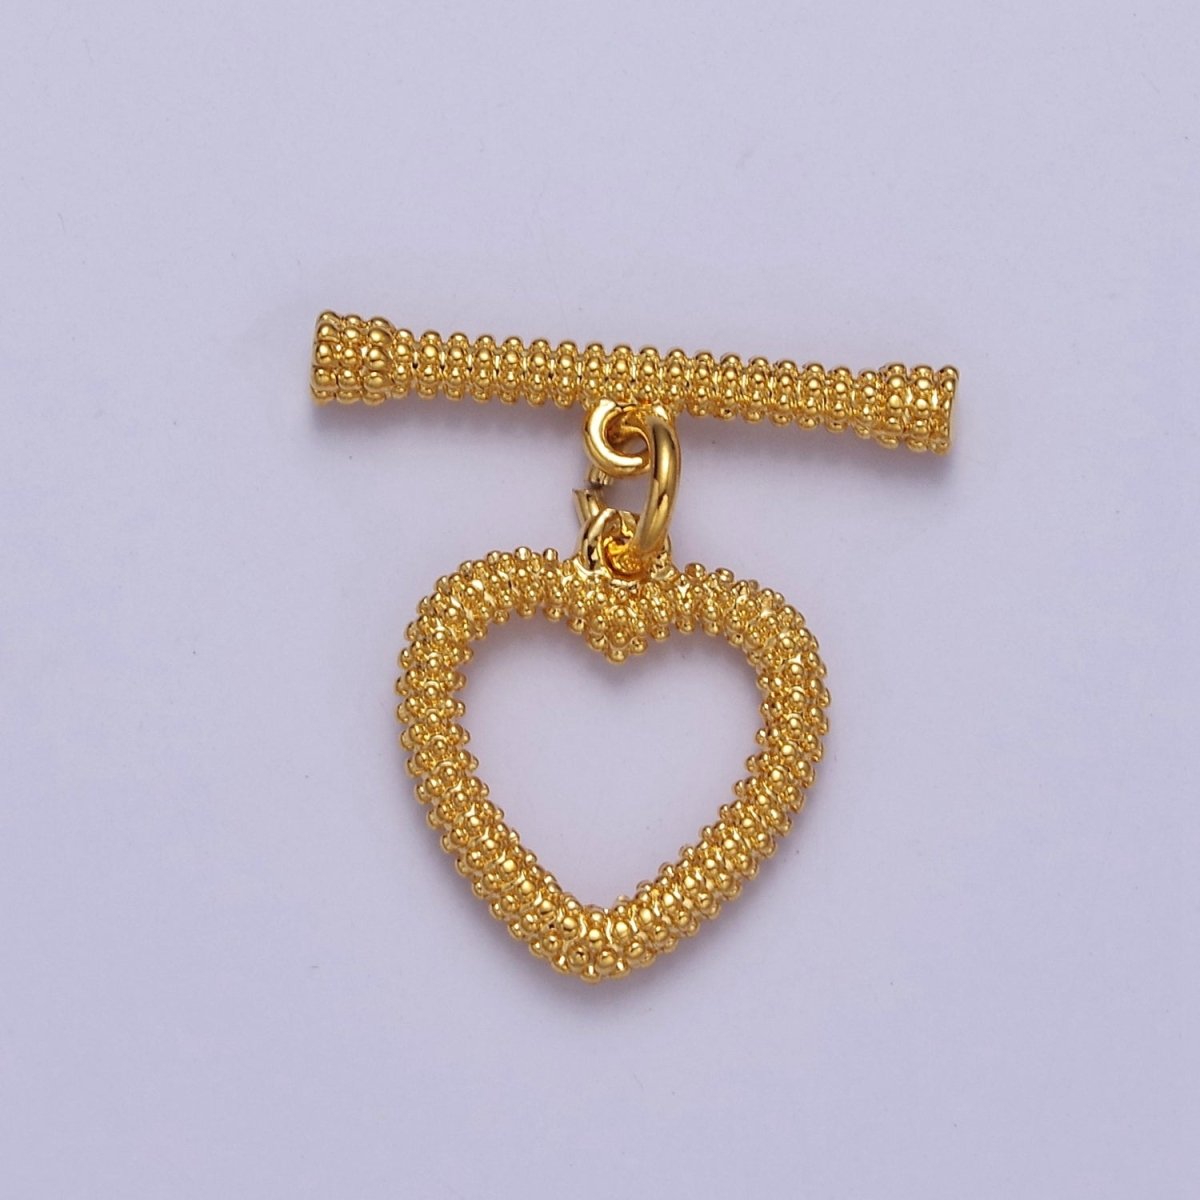 Heart Toggle Clasp Connector, 24k Gold Filled Toggle Clasp, Jewelry End Clasp for Bracelet, Necklace Closure L-644 L-682 L-683 - DLUXCA